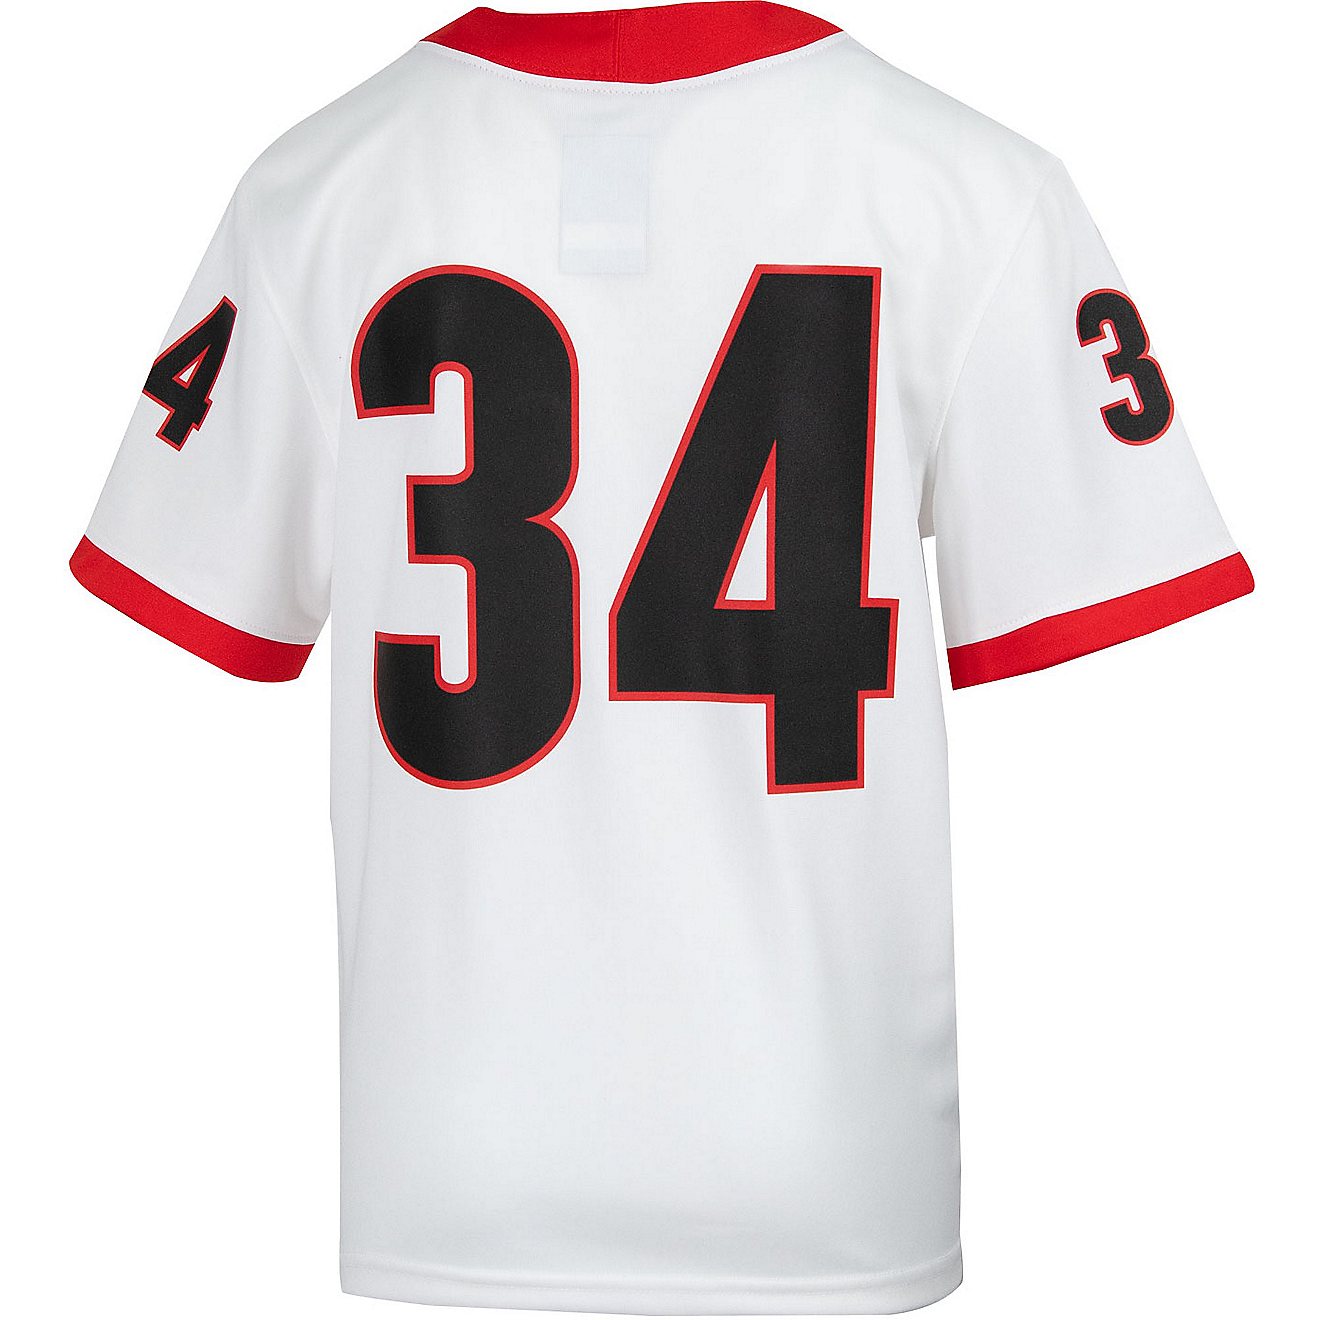 Nike Boys' University of Georgia Young Athletes Replica Football Jersey                                                          - view number 2